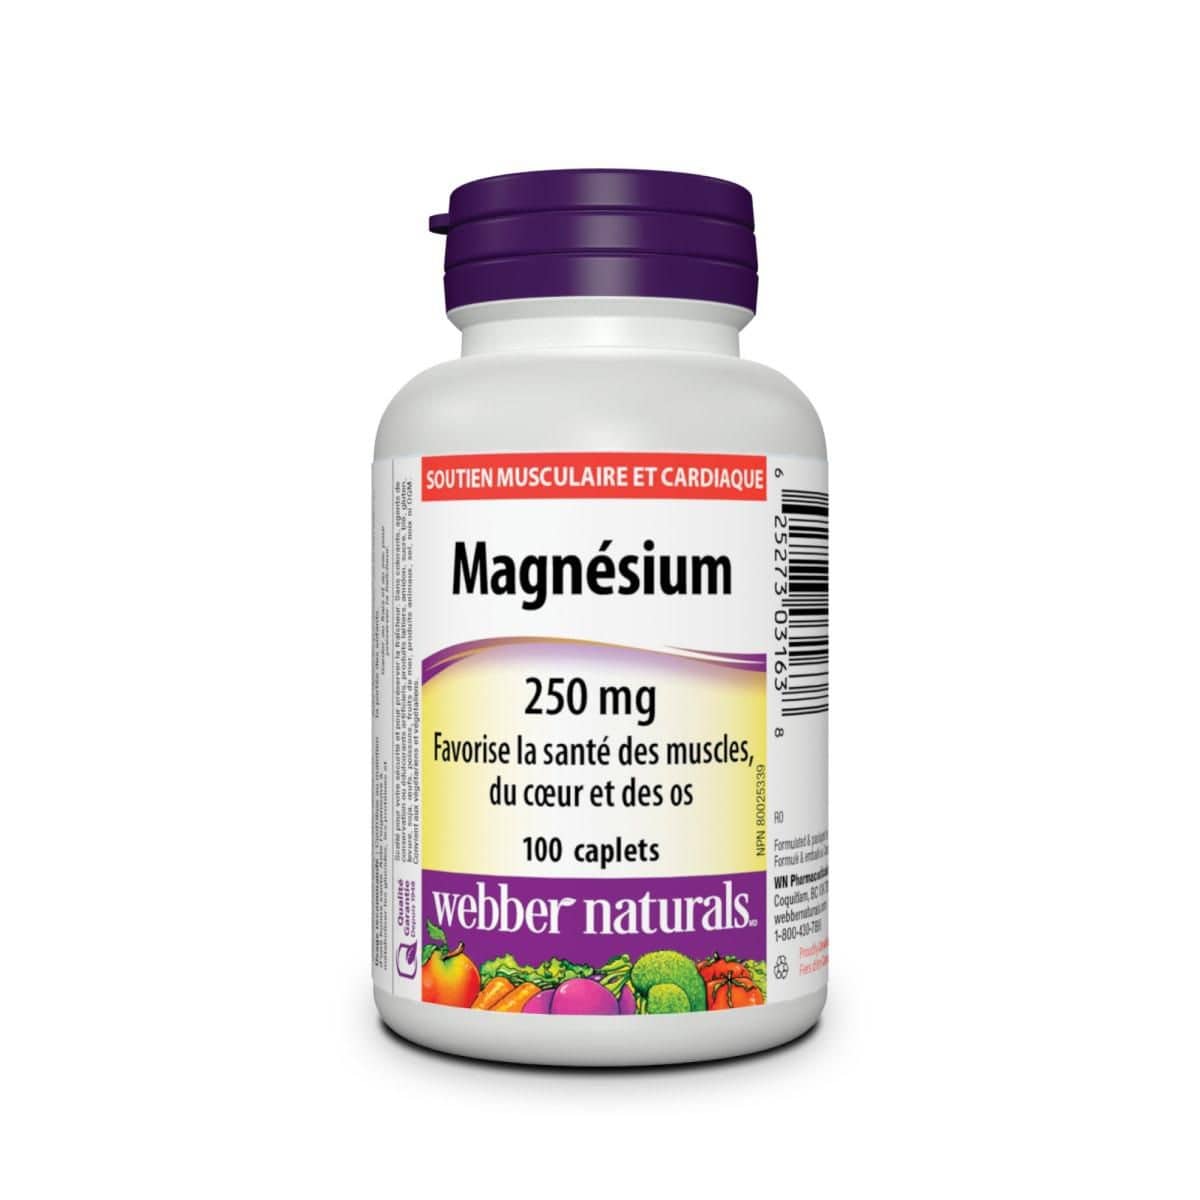 Product label for webber naturals Magnesium 250 mg (100 caplets) in French